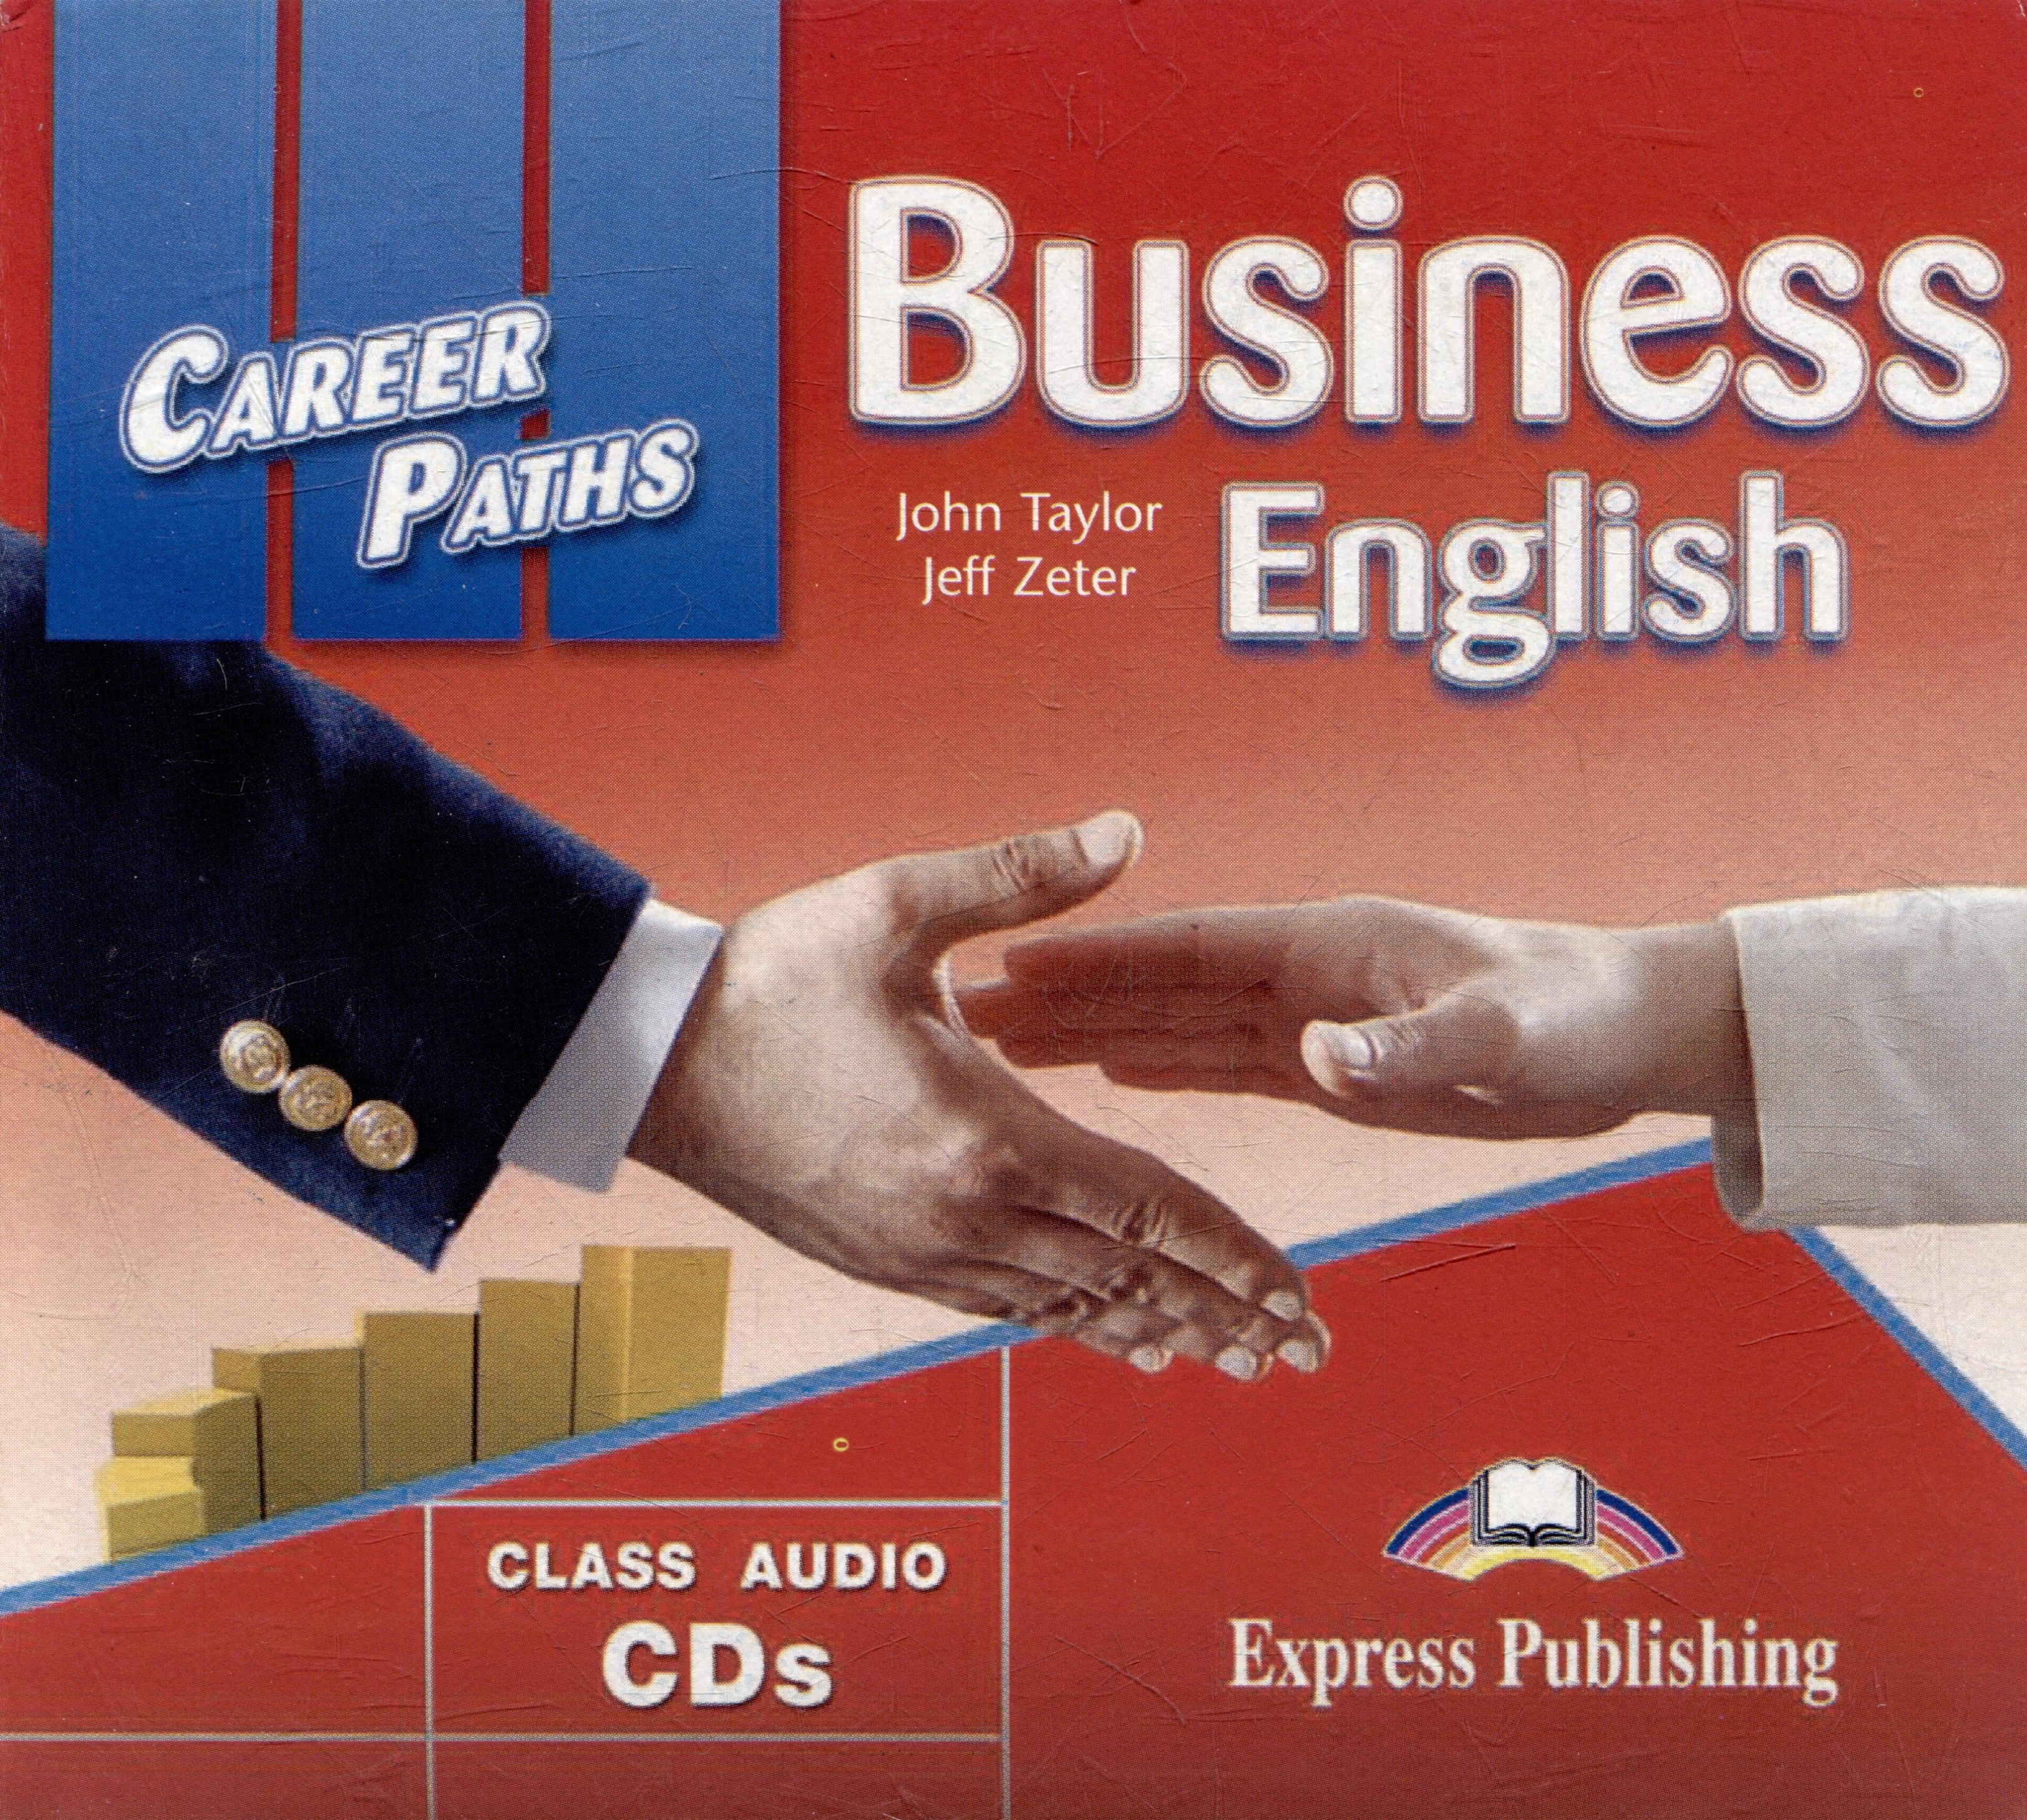 Career Paths. Business English. Audio CDs (set of 2)